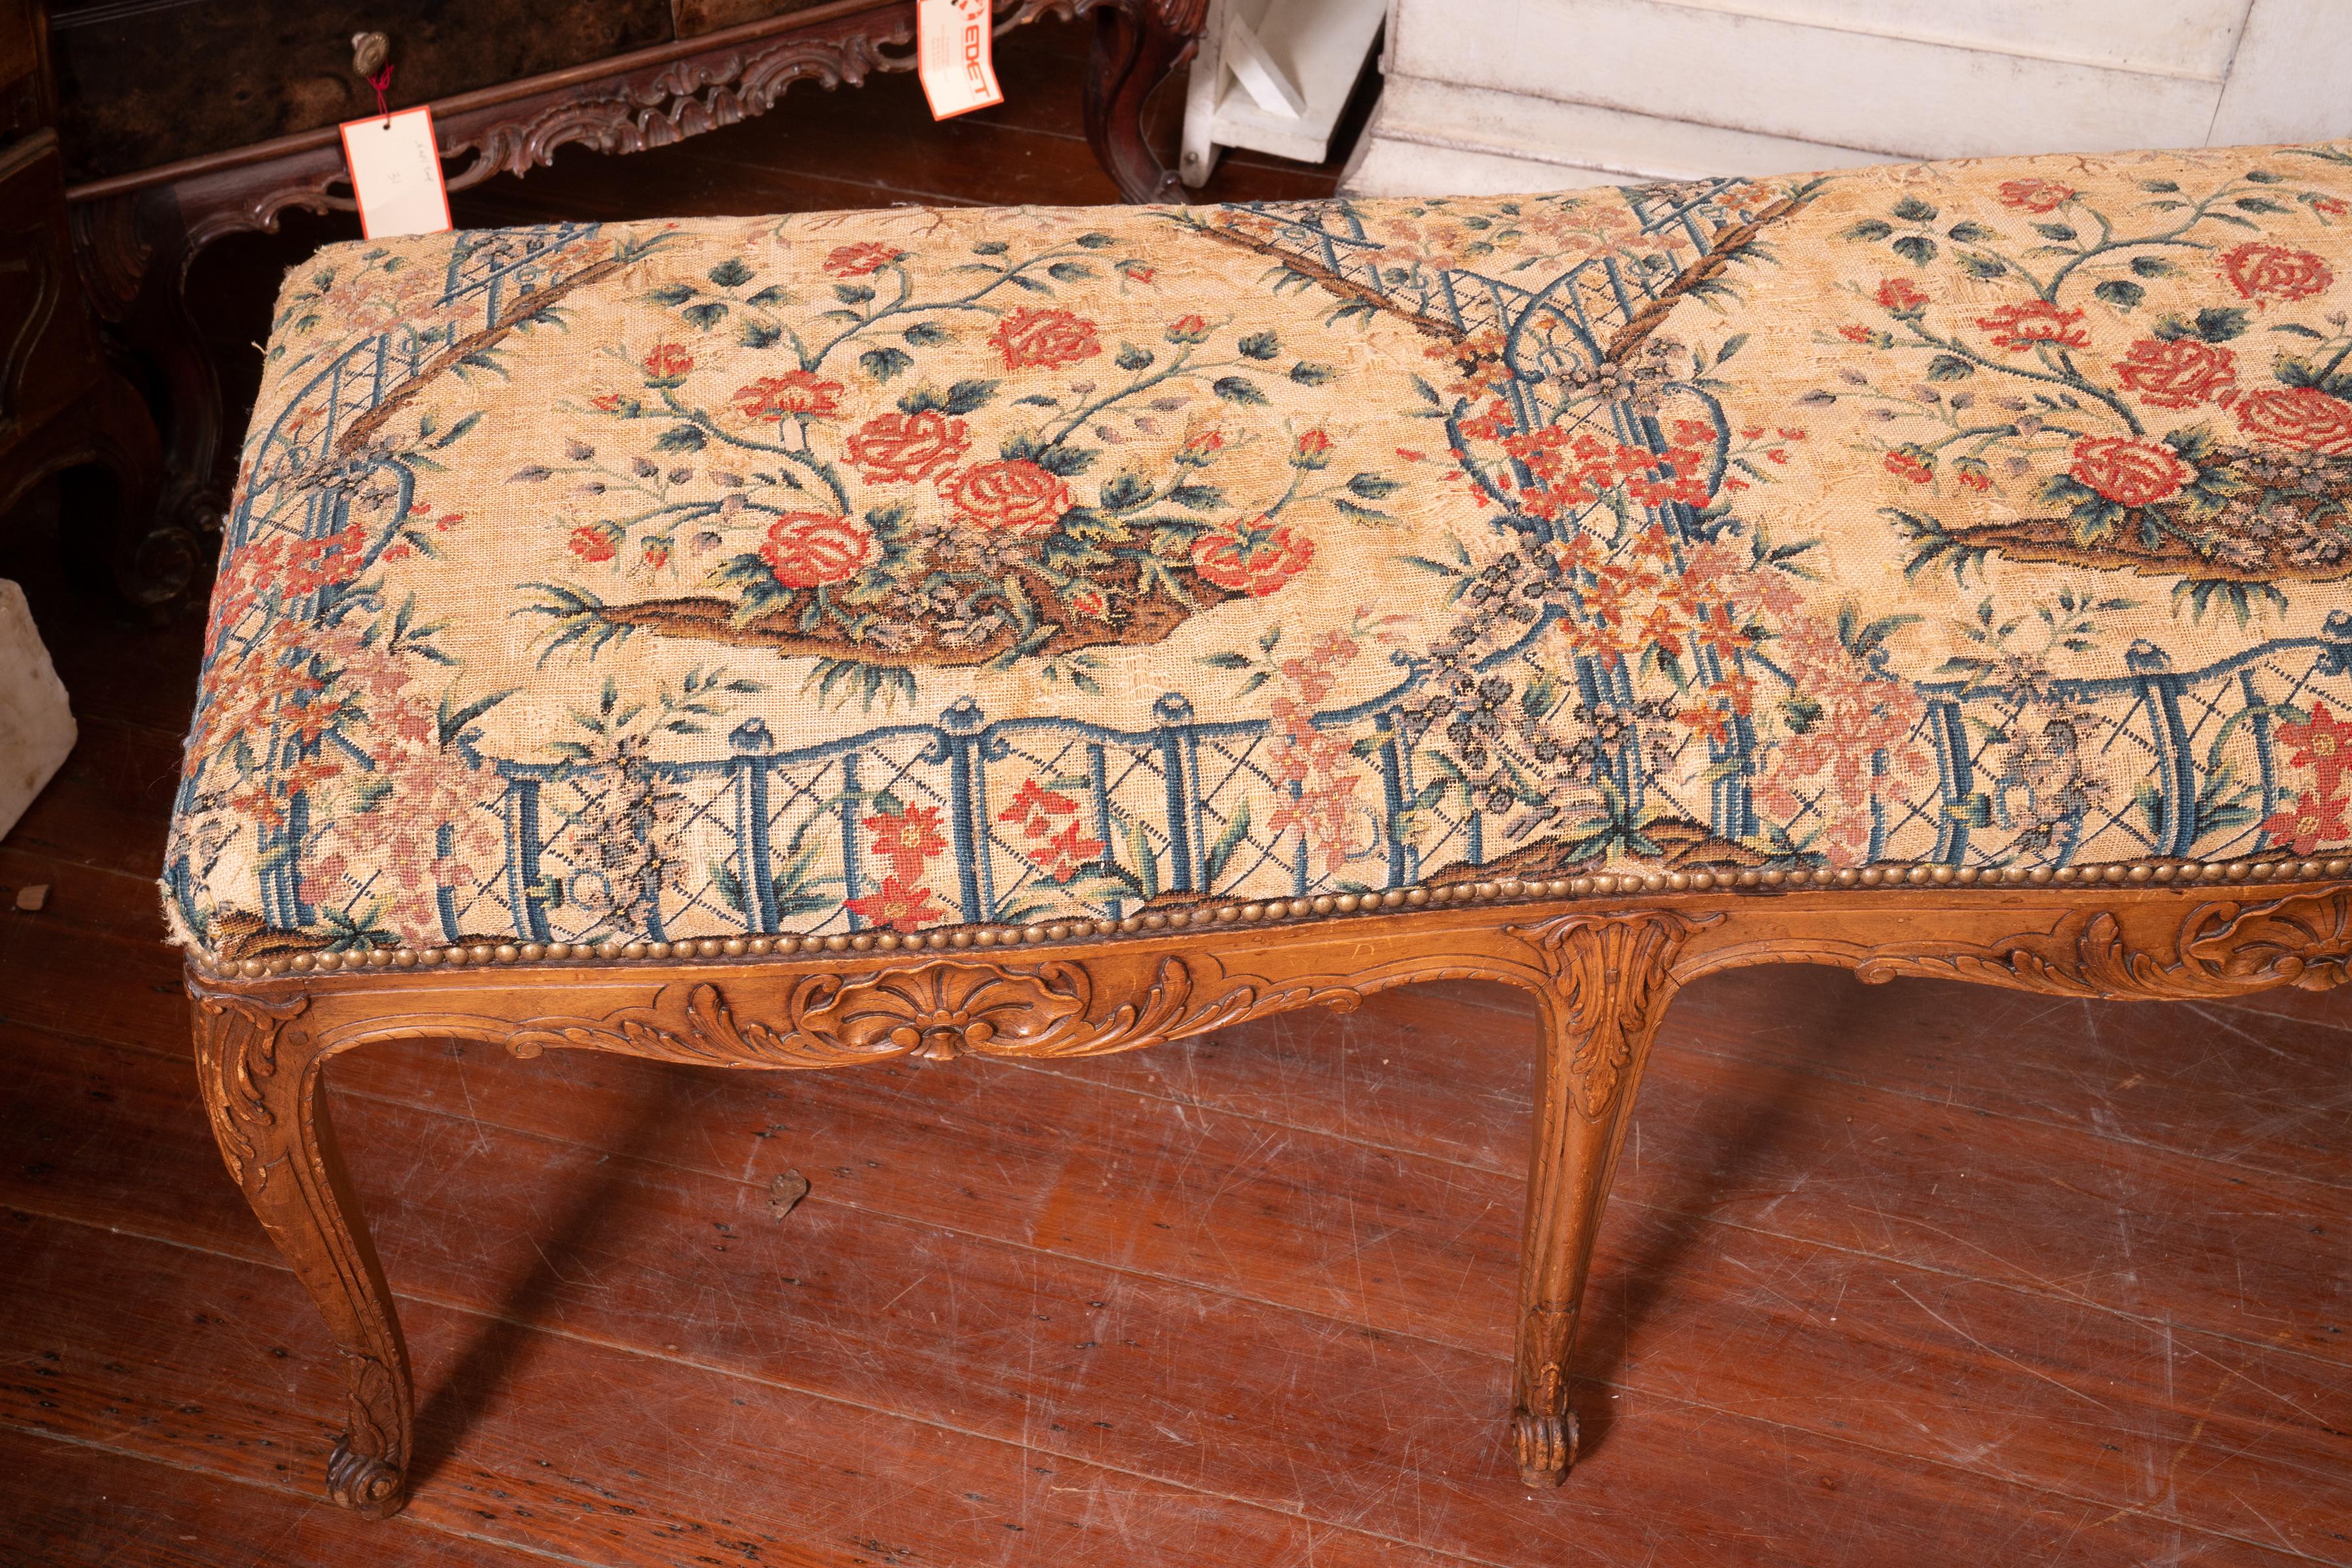 19th century. Carved honey colored walnut bench with original needlepoint cushioning.